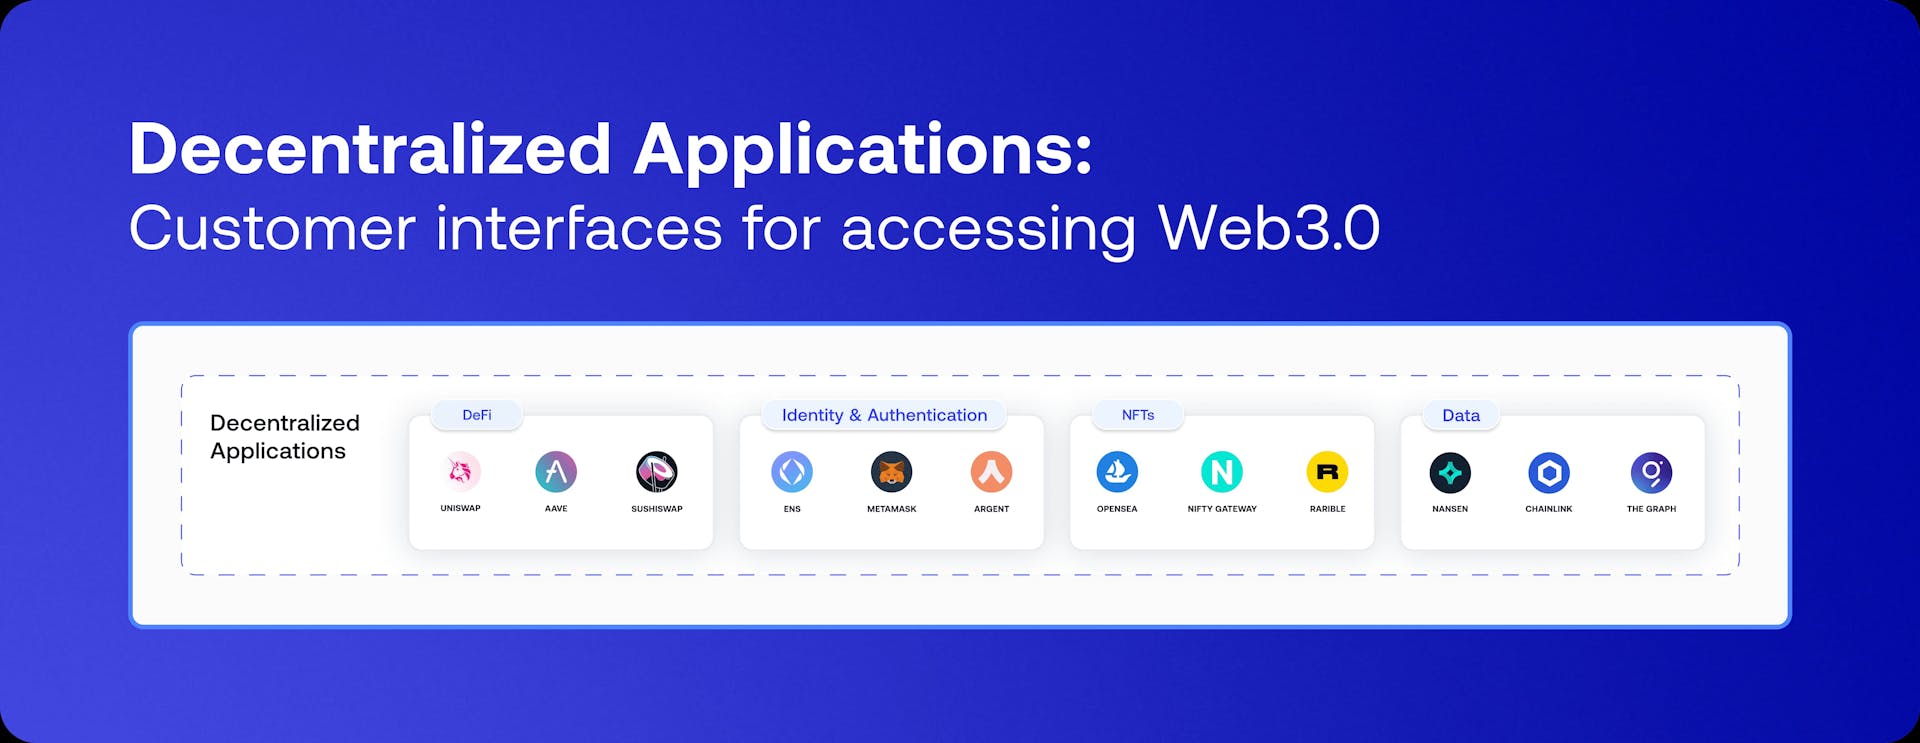 Decentralized Applications: Customer interfaces for accessing Web3.0